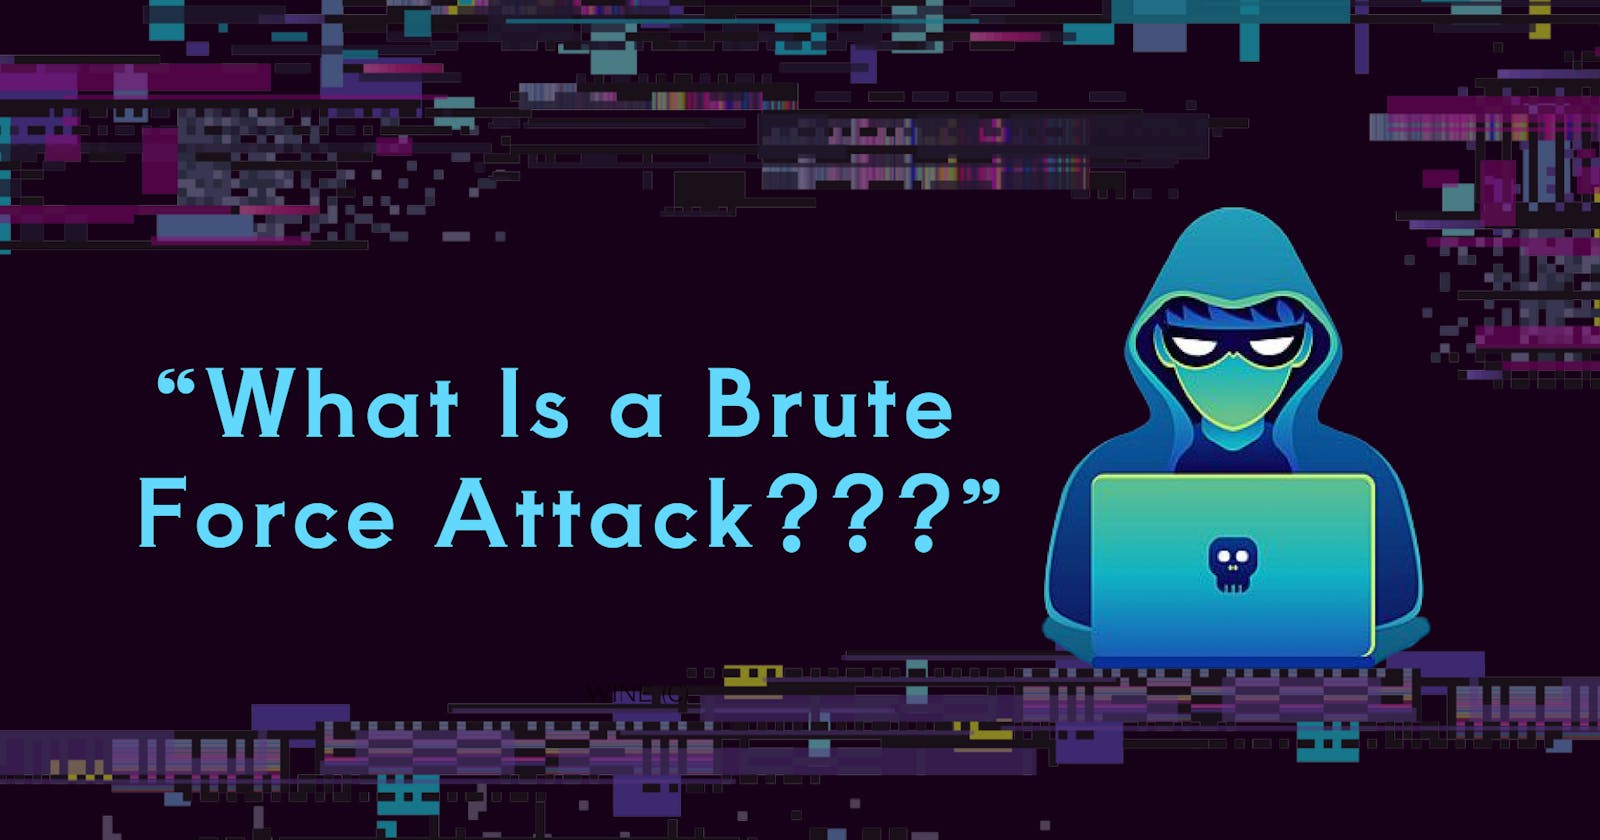 What Is a Brute Force Attack?